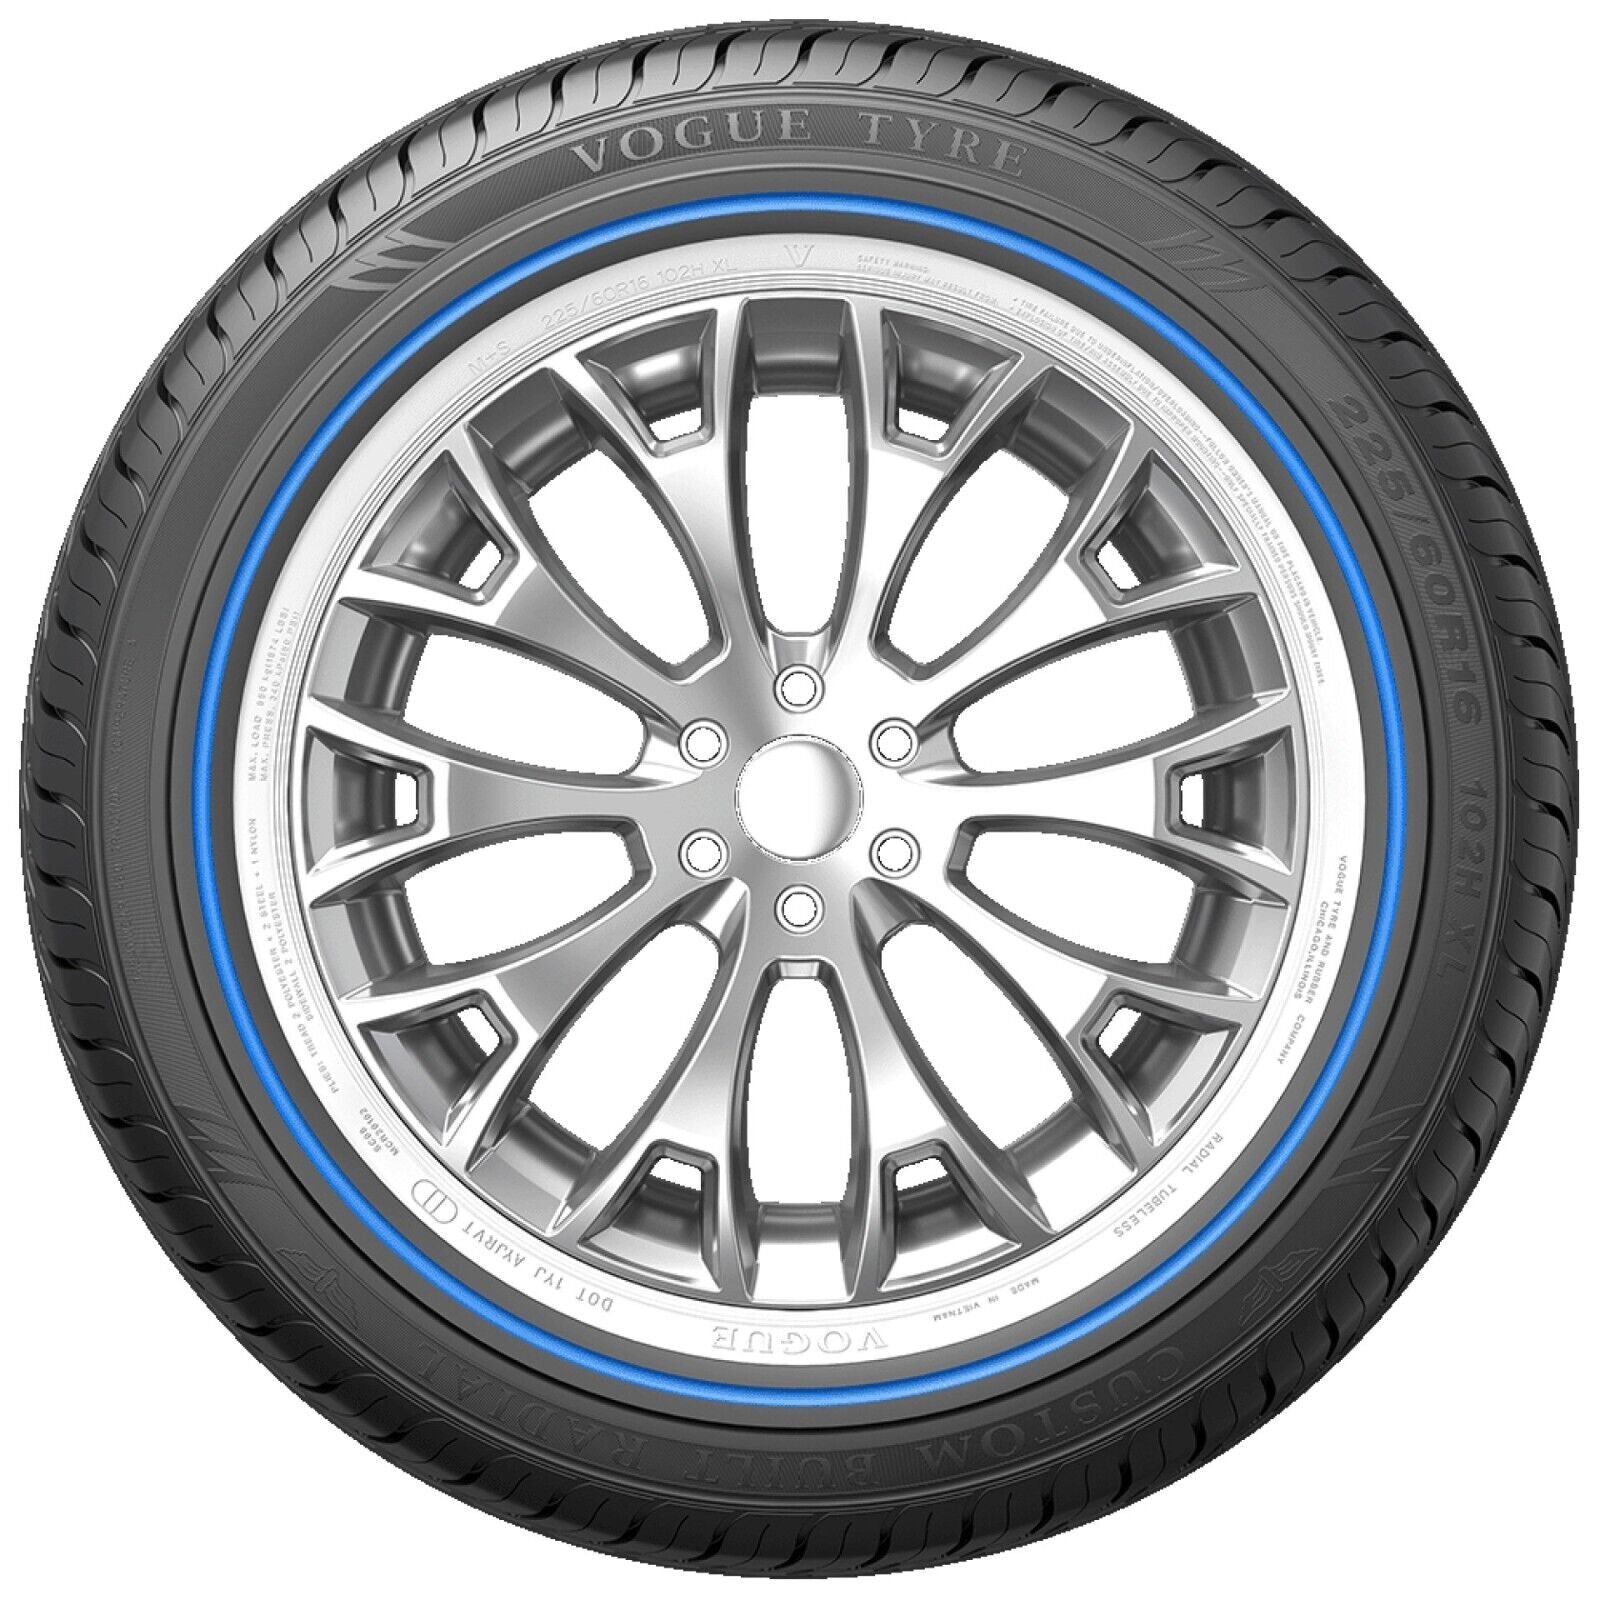 VOGUE TYRE LIMITED EDITION 245-40R20 BLUE AND WHITE SET OF 4 TIRES